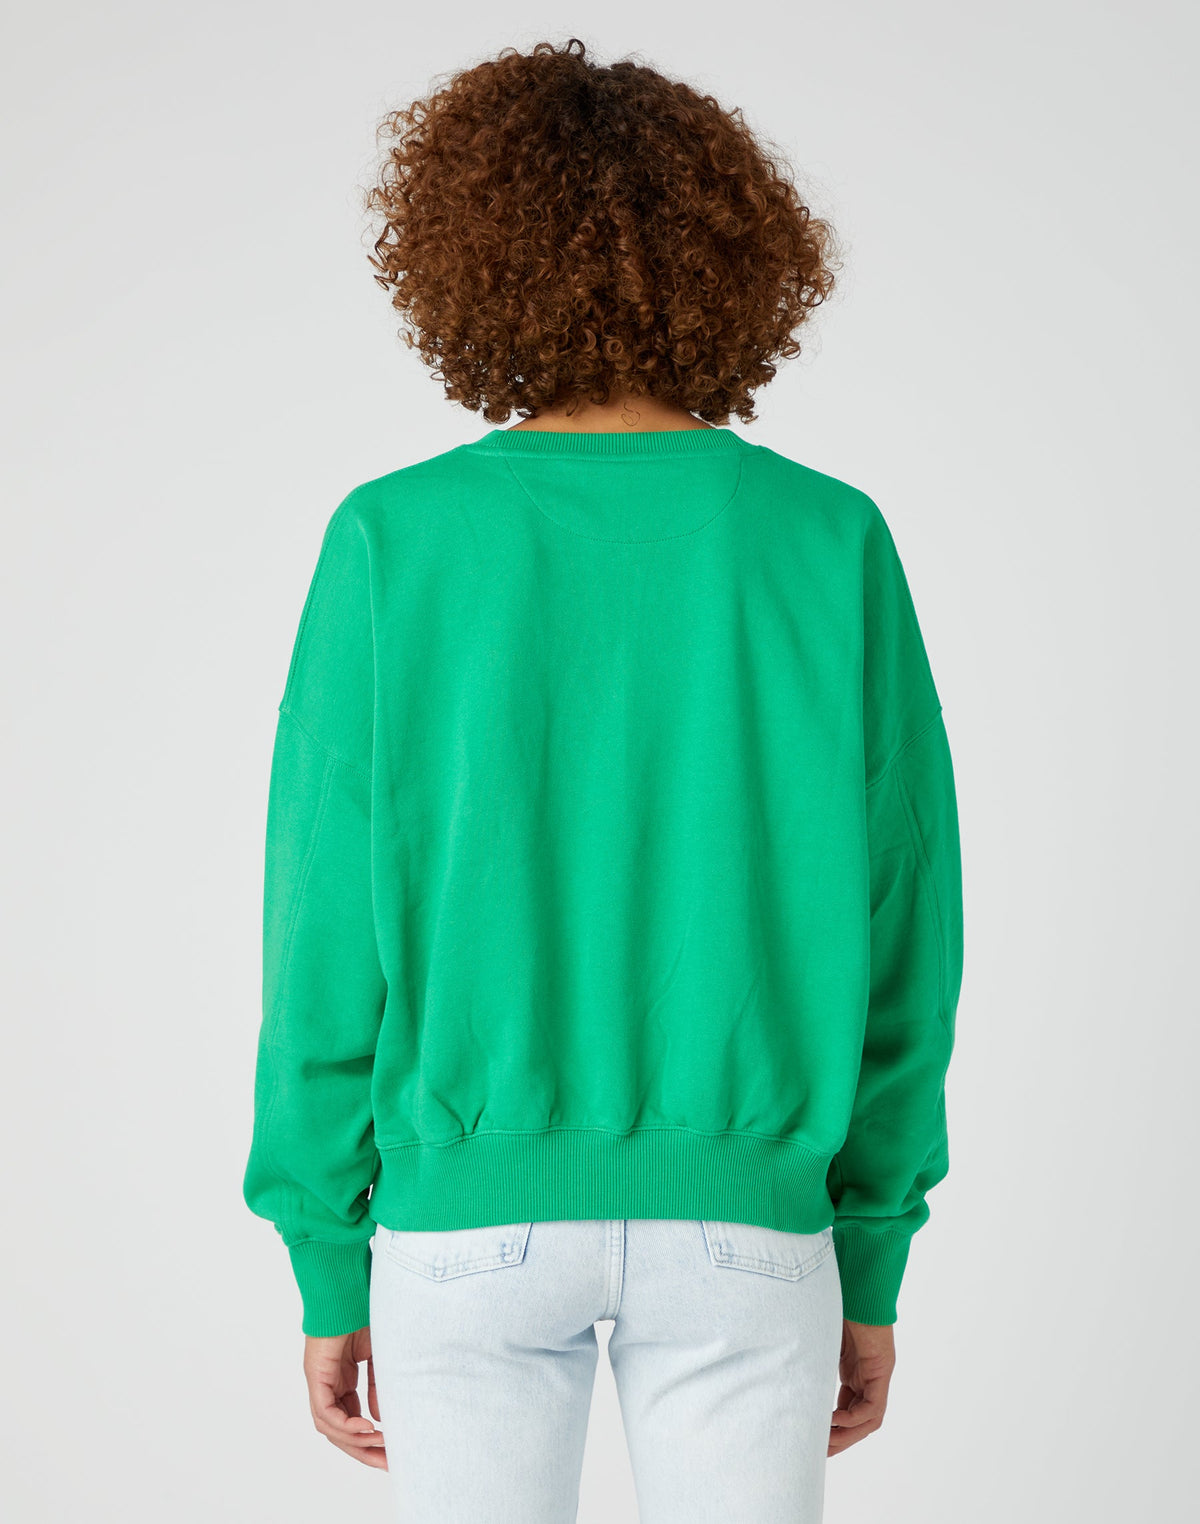 Relaxed Sweatshirt in Bright Green